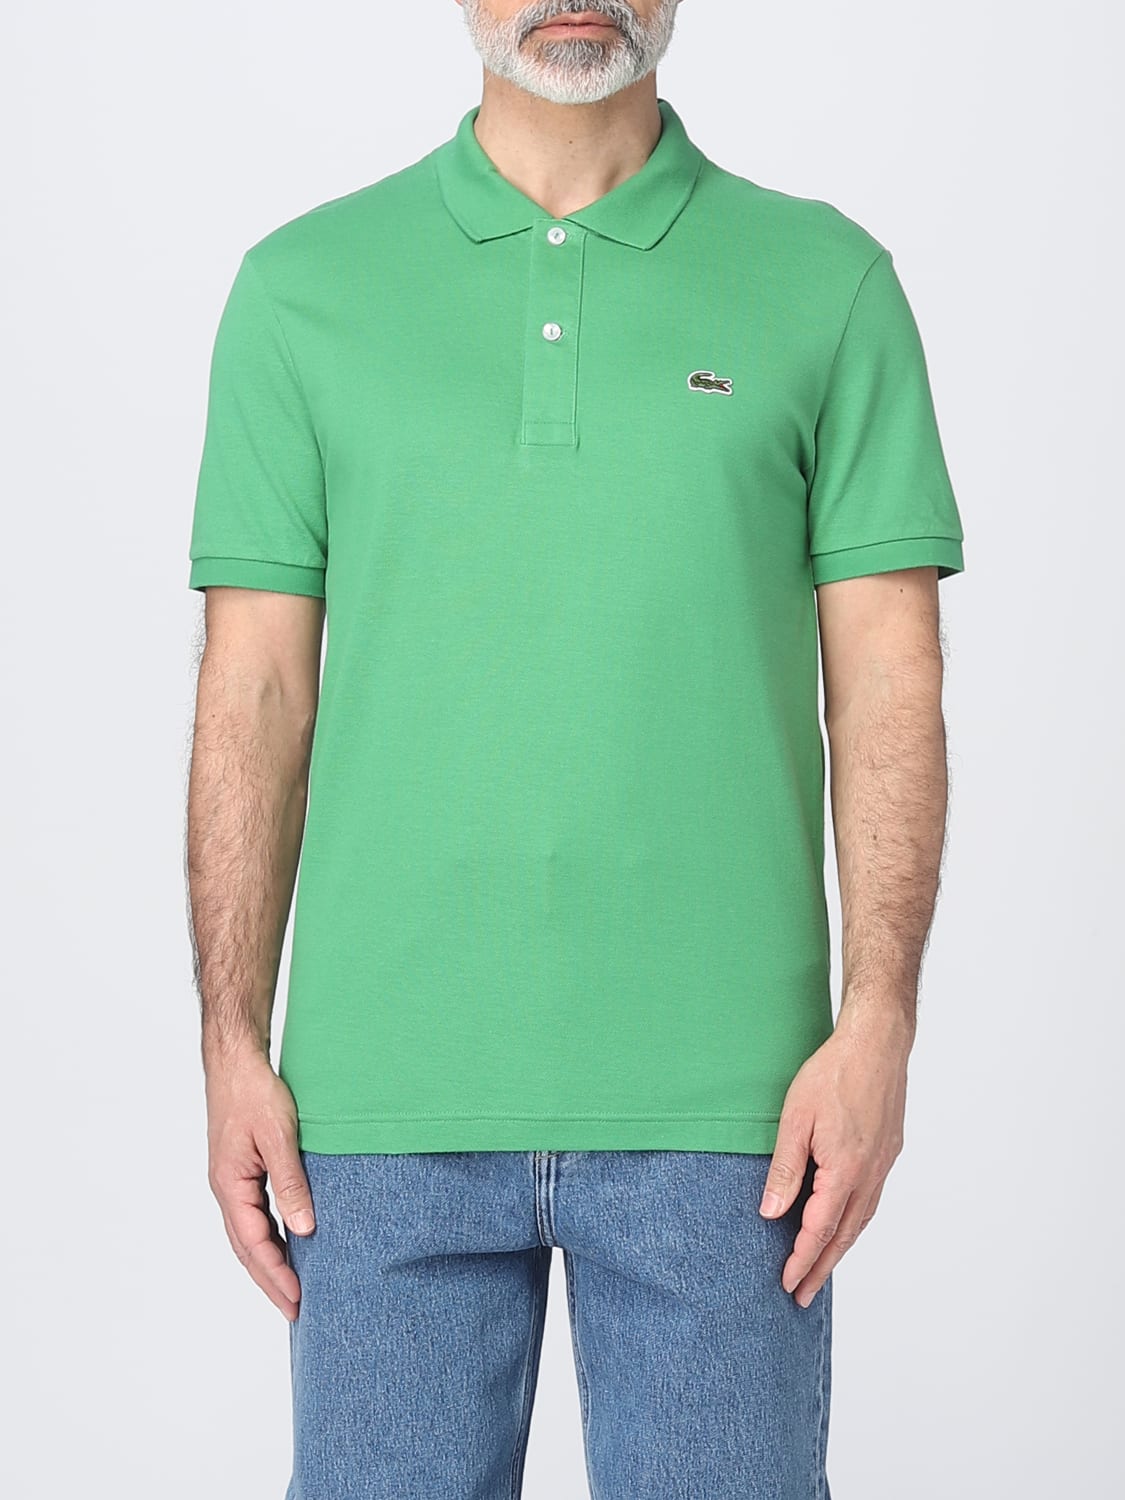 behagelig dommer spise LACOSTE: polo shirt for man - Moss Green | Lacoste polo shirt PH4012 online  on GIGLIO.COM